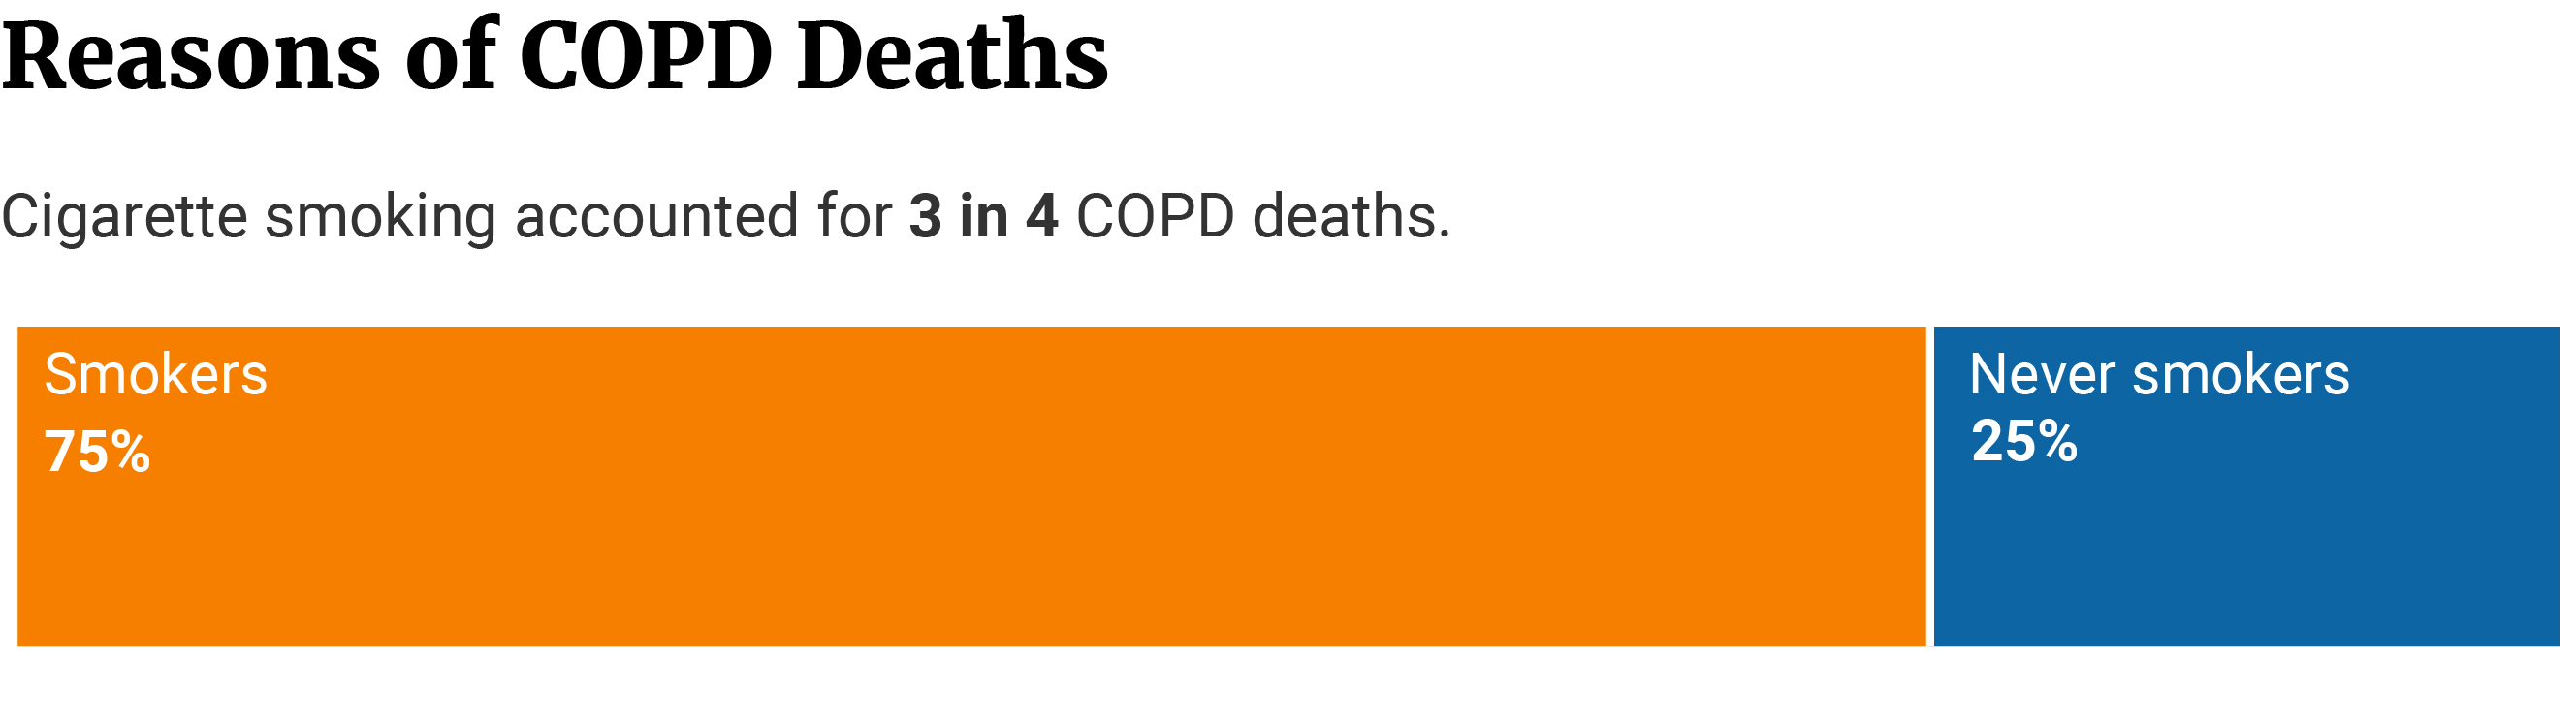 Stacked bar showing COPD deaths in smokers (75%) and never smokers (25%).